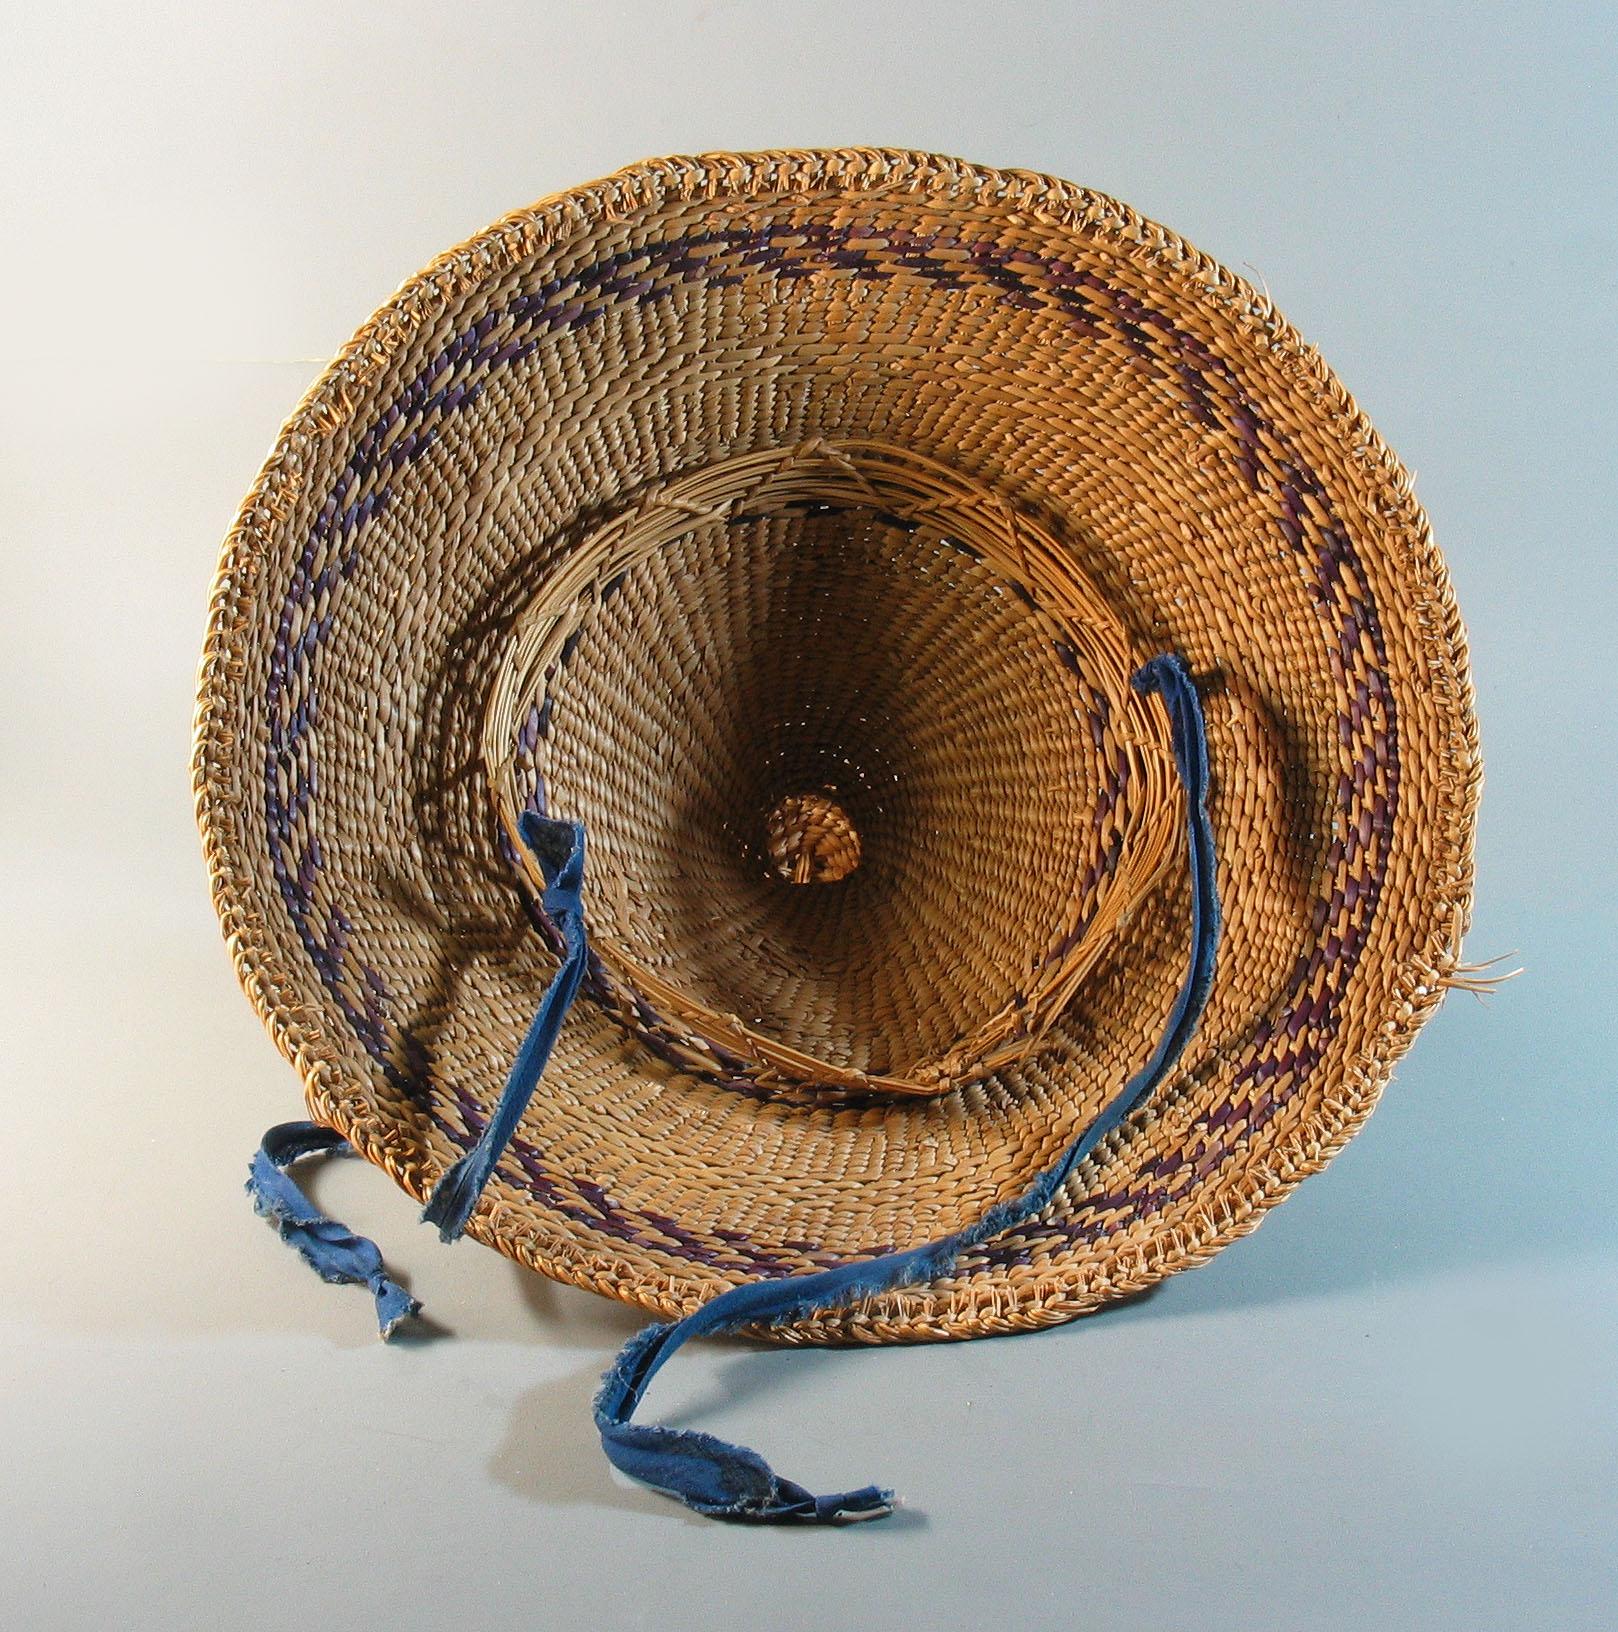 20th Century Kuba Ceremonial Raffia Textile Panel with a Hat from Lesotho Tribal Art Drc For Sale